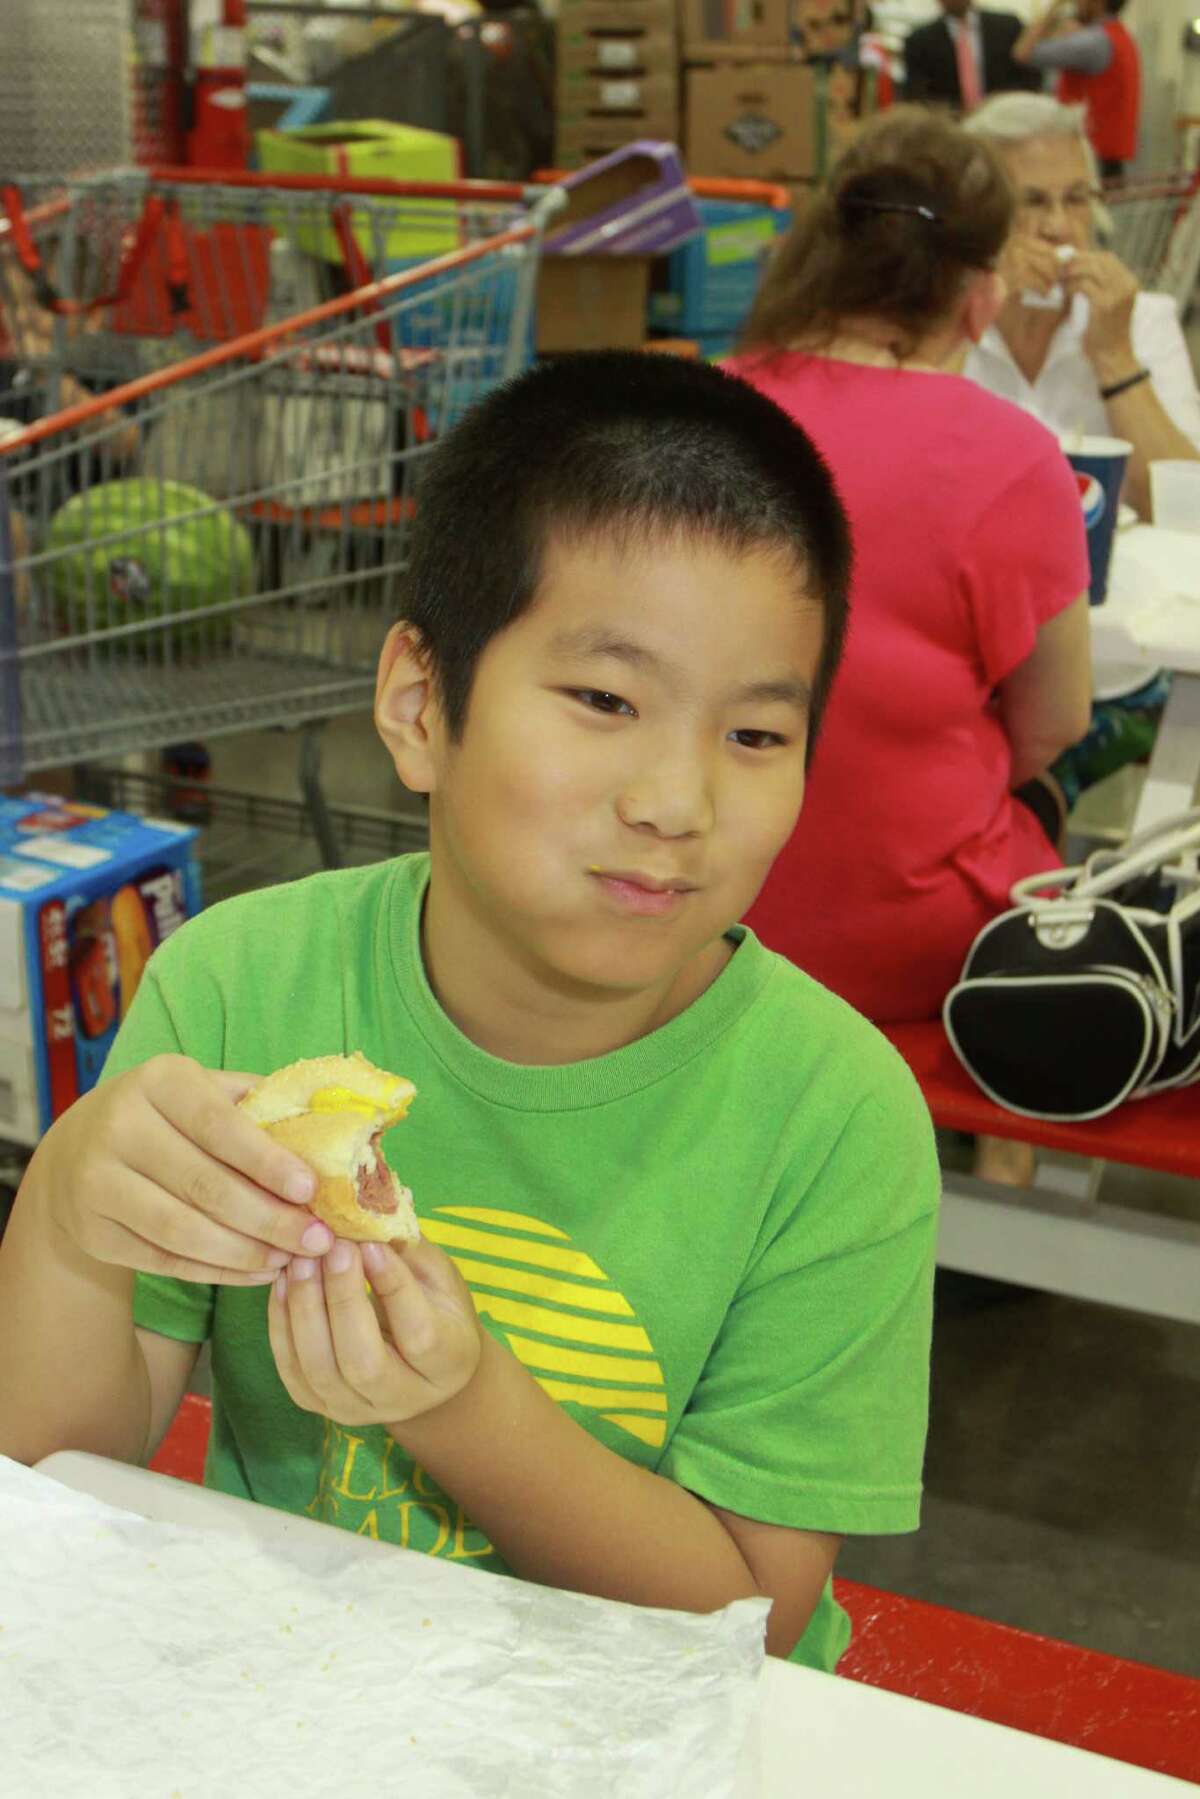 Albert Ma, 8, enjoys a hot dog. Costco says it sells 110 million hot-dog-and-soda combos a year, at $1.50 each.